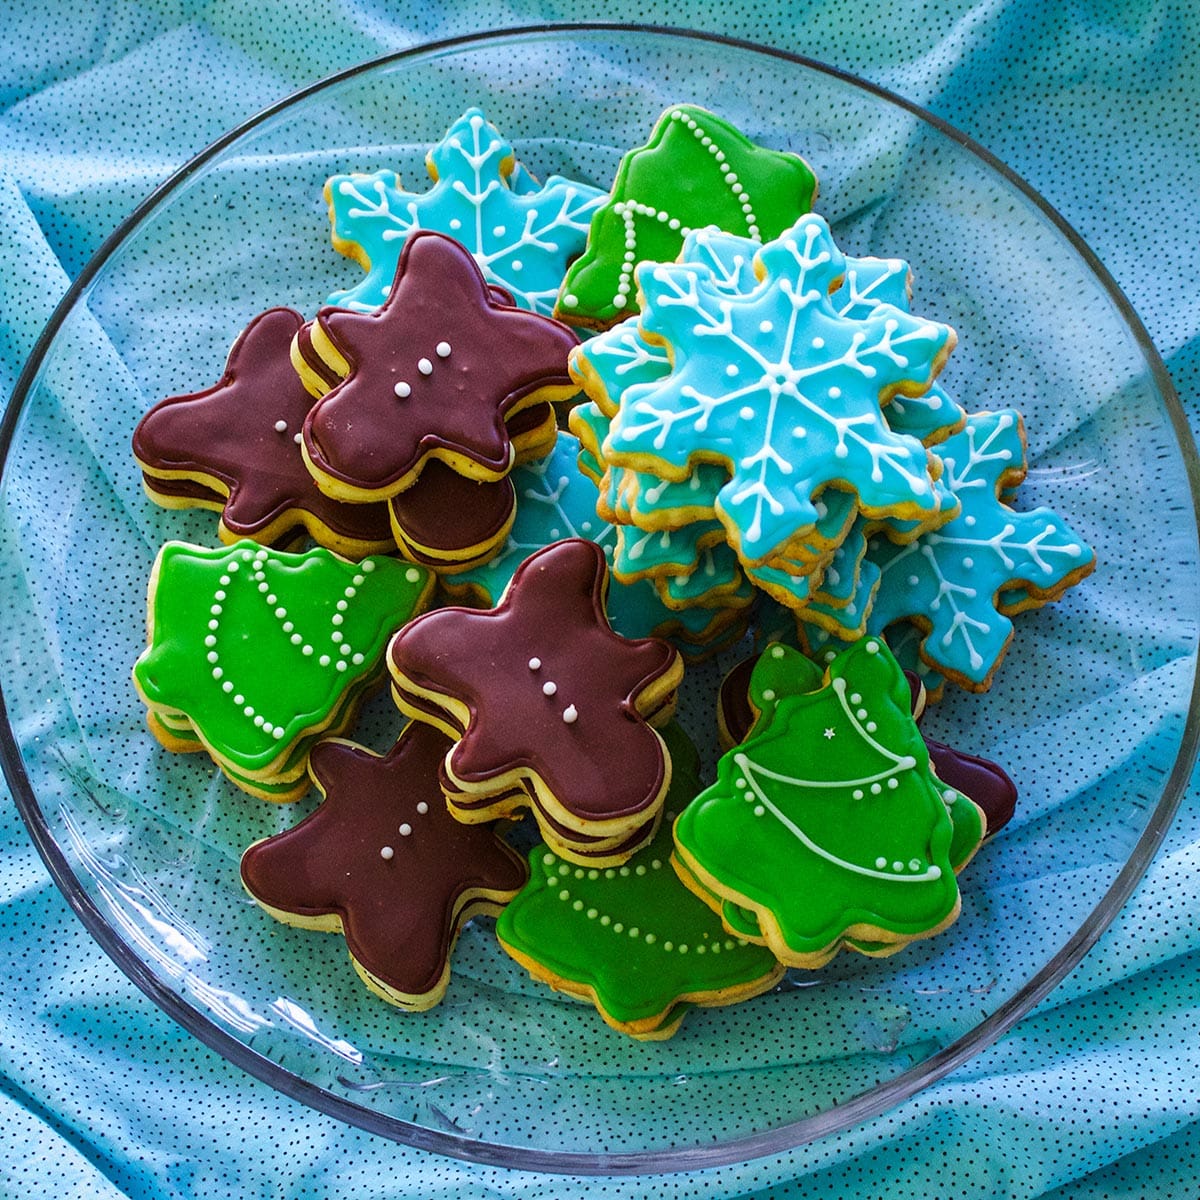 A glass plate filled with brown butter frosted ad decorated Christmas cookies.